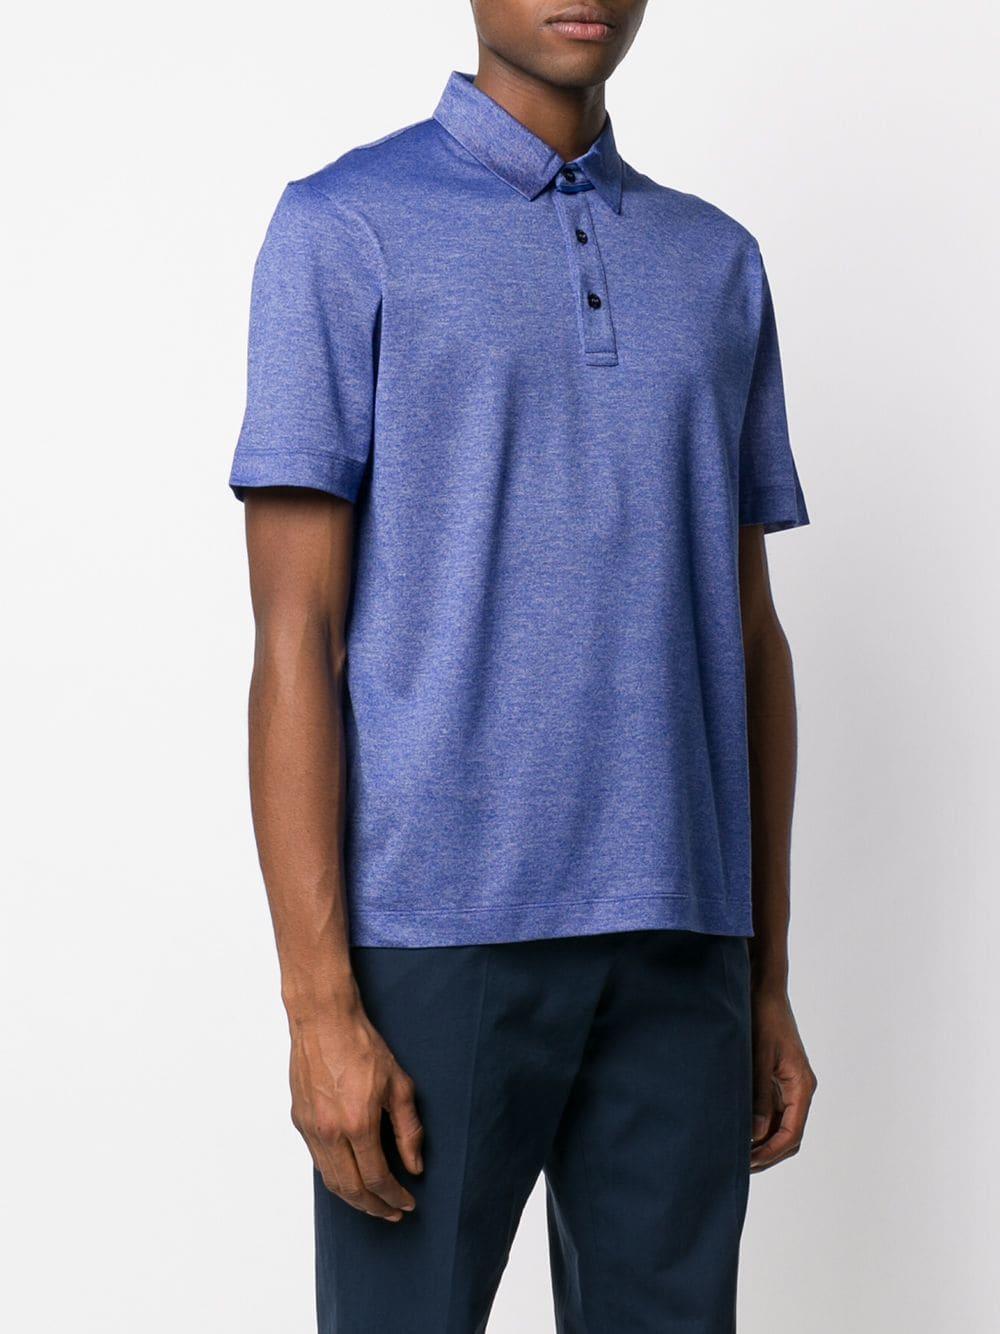 Canali Cotton Short-sleeve Polo Shirt in Blue for Men - Lyst